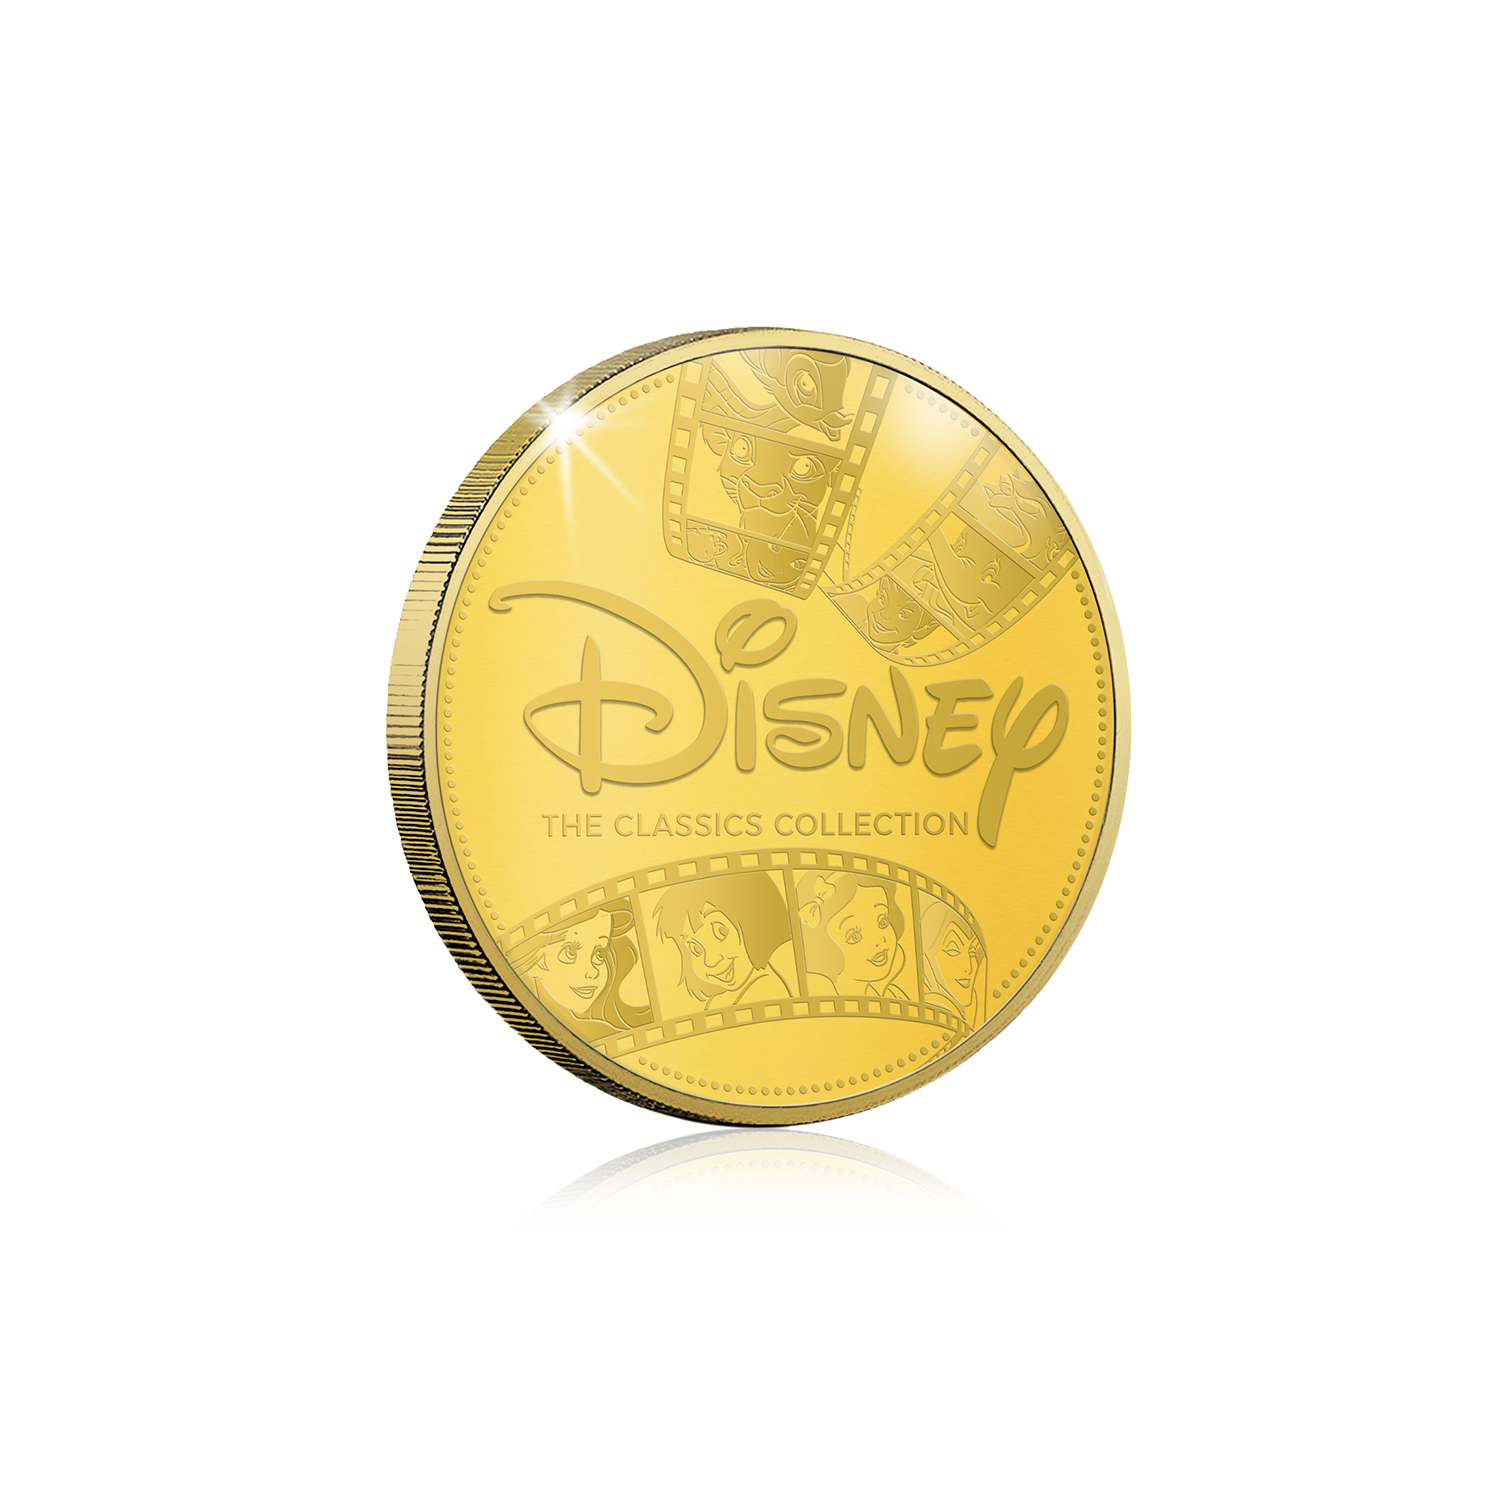 Wreck It Ralph Commemorative - Gold Plated